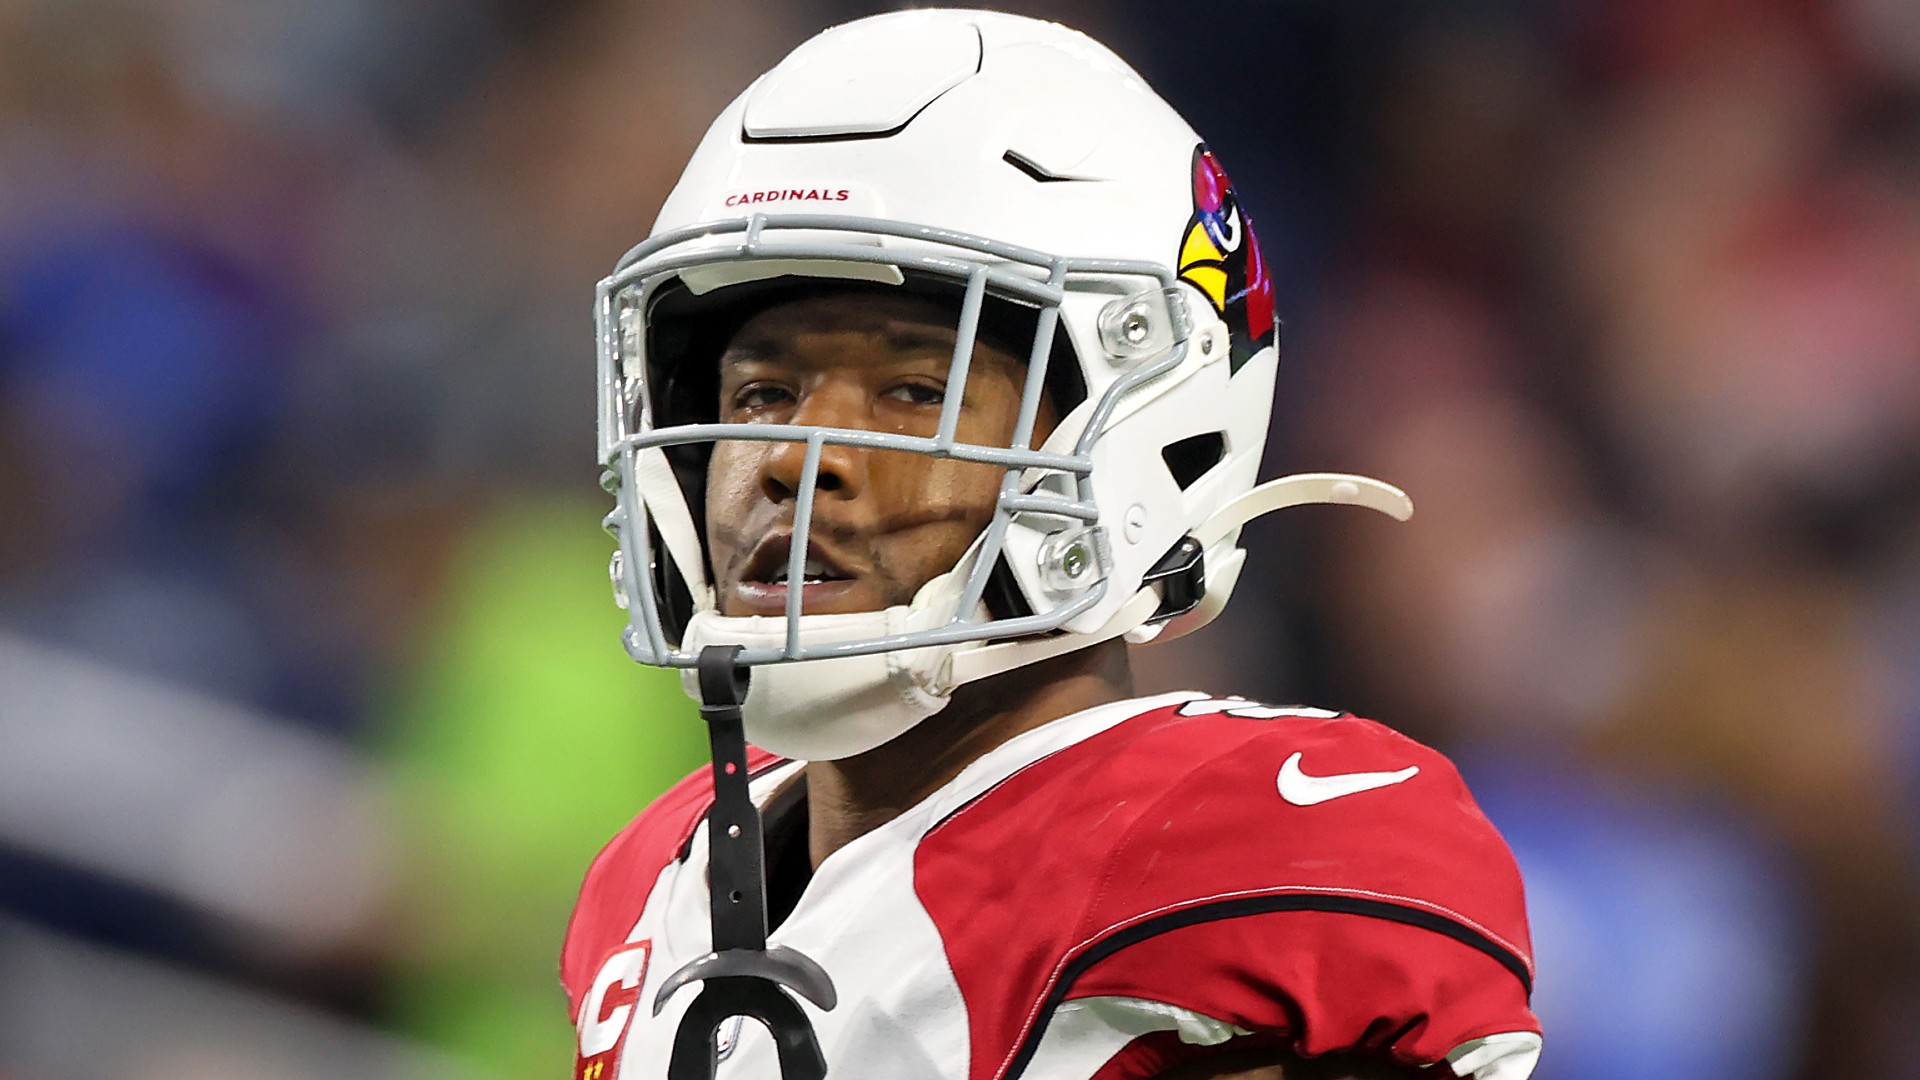 Budda Baker injury update: Cardinals safety carted off after suffering concussion in collision with Rams' Cam Akers